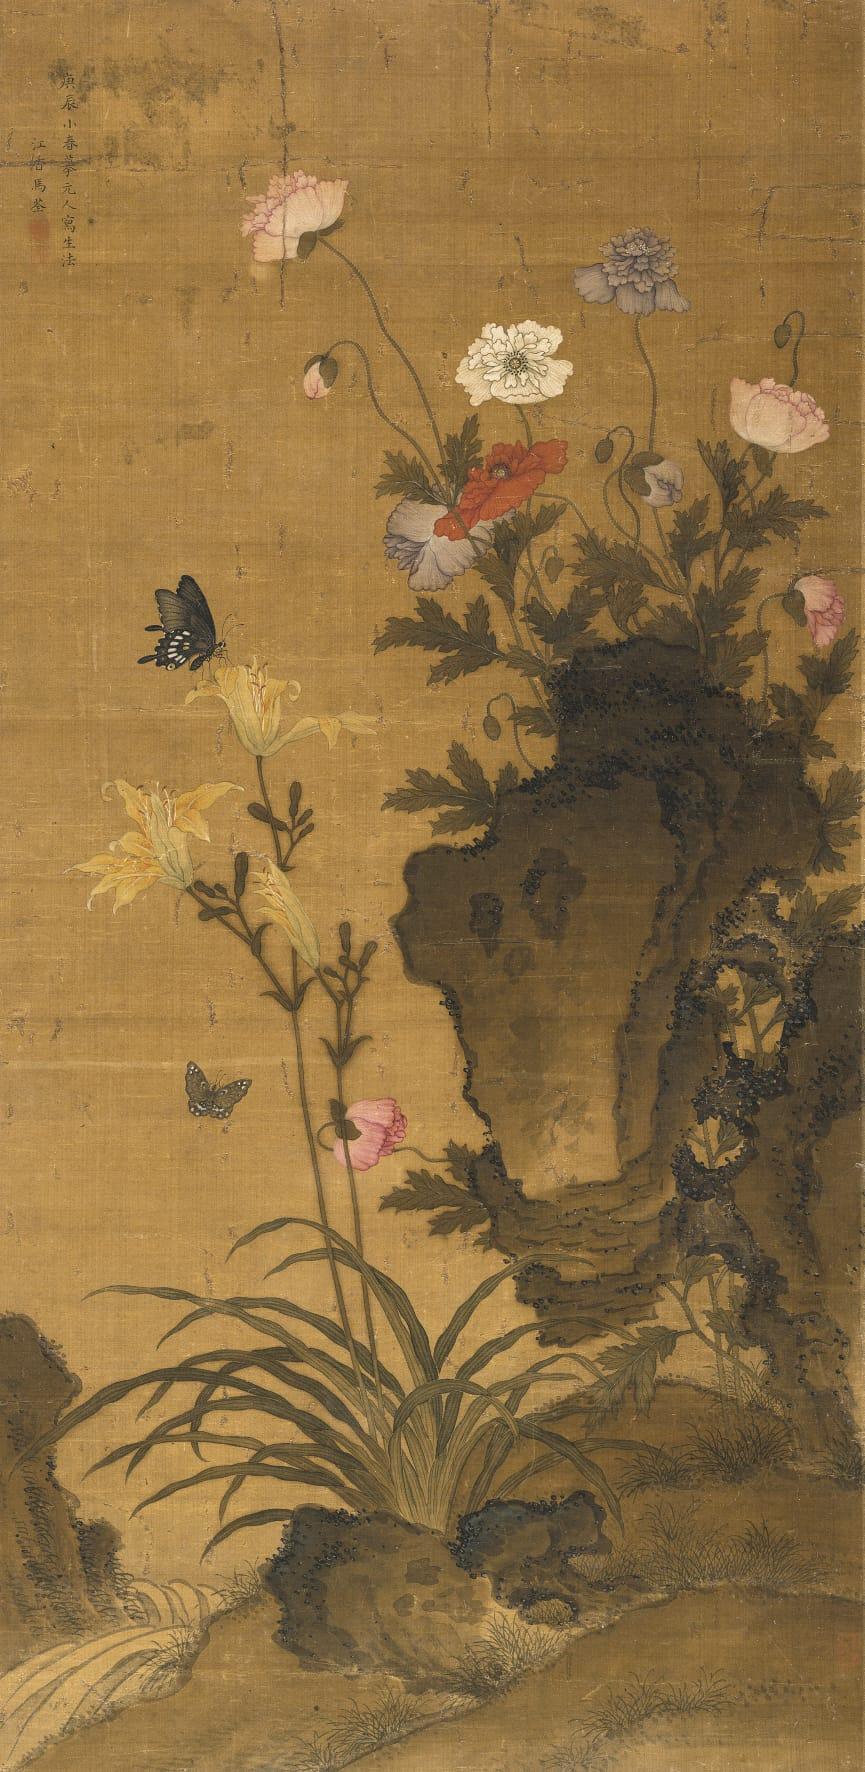 The opening ceremony for the exhibition "The Hong Kong Jockey Club Series: Women and Femininity in Ancient China - Treasures from the Nanjing Museum" was held today (November 29) at the Hong Kong Heritage Museum. Photo shows a grade-one national treasure, the "Flowers and butterflies" hanging scroll created by female painter Ma Quan in the Qing dynasty. (Source of photo: Nanjing Museum)